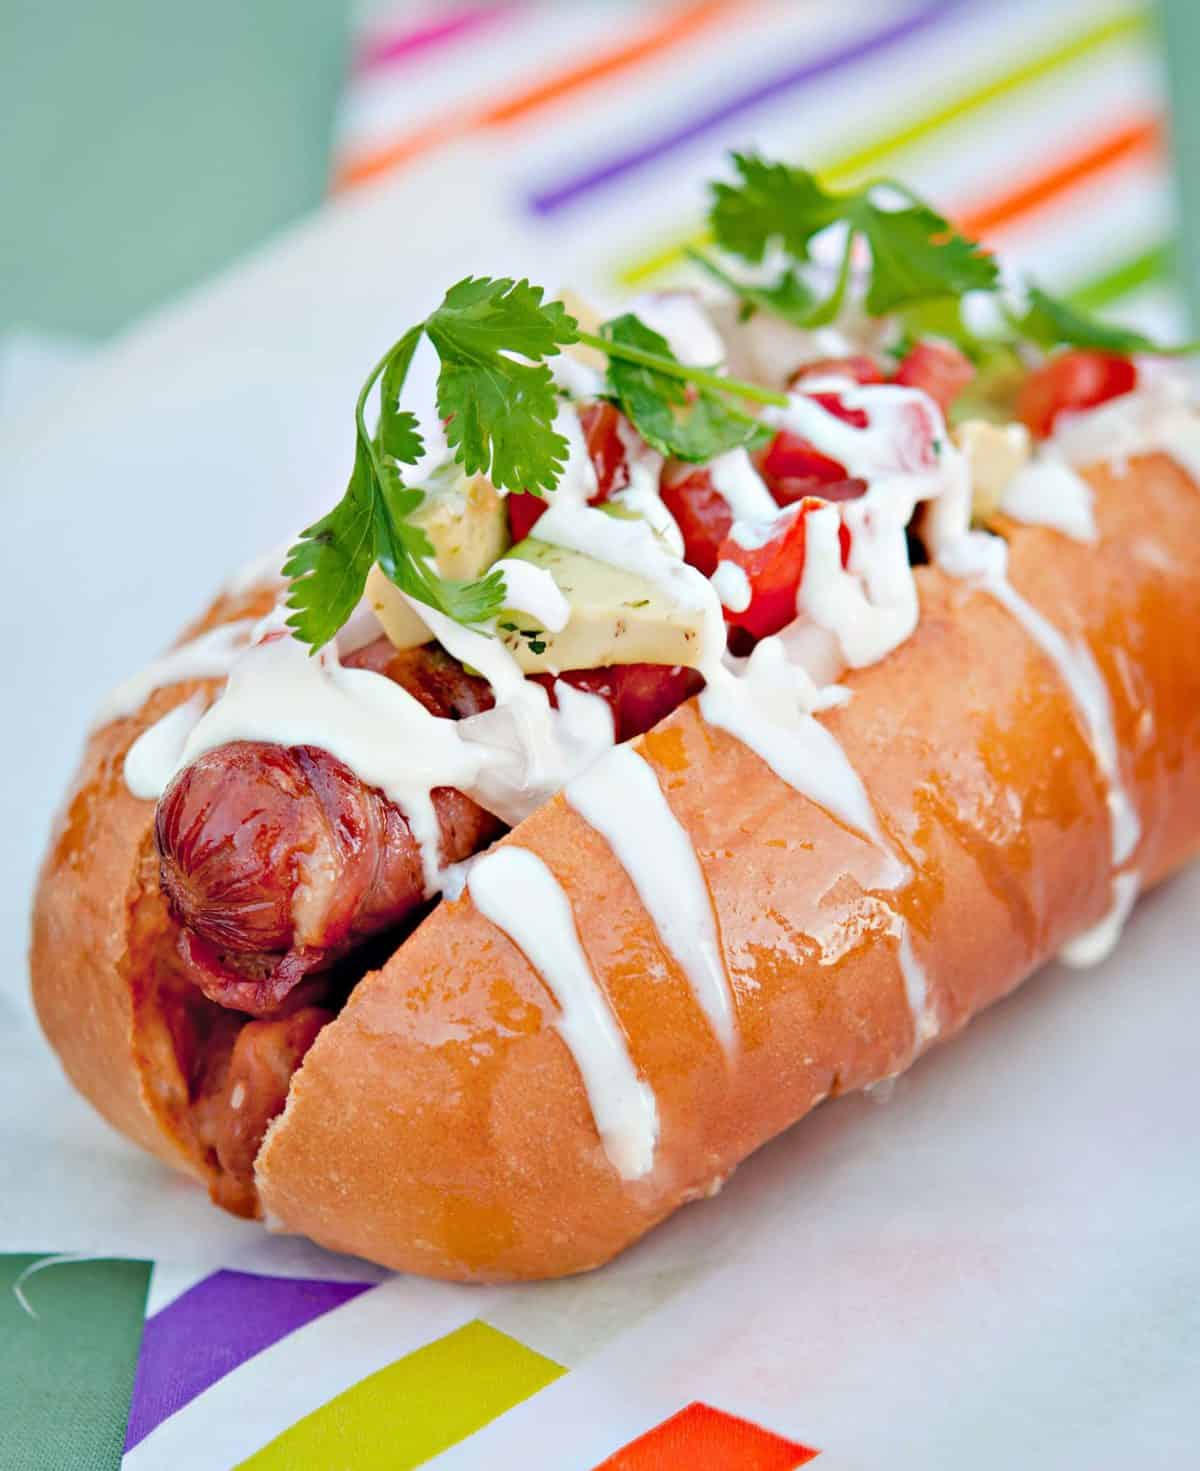 Bacon Wrapped Sonoran Hot Dogs